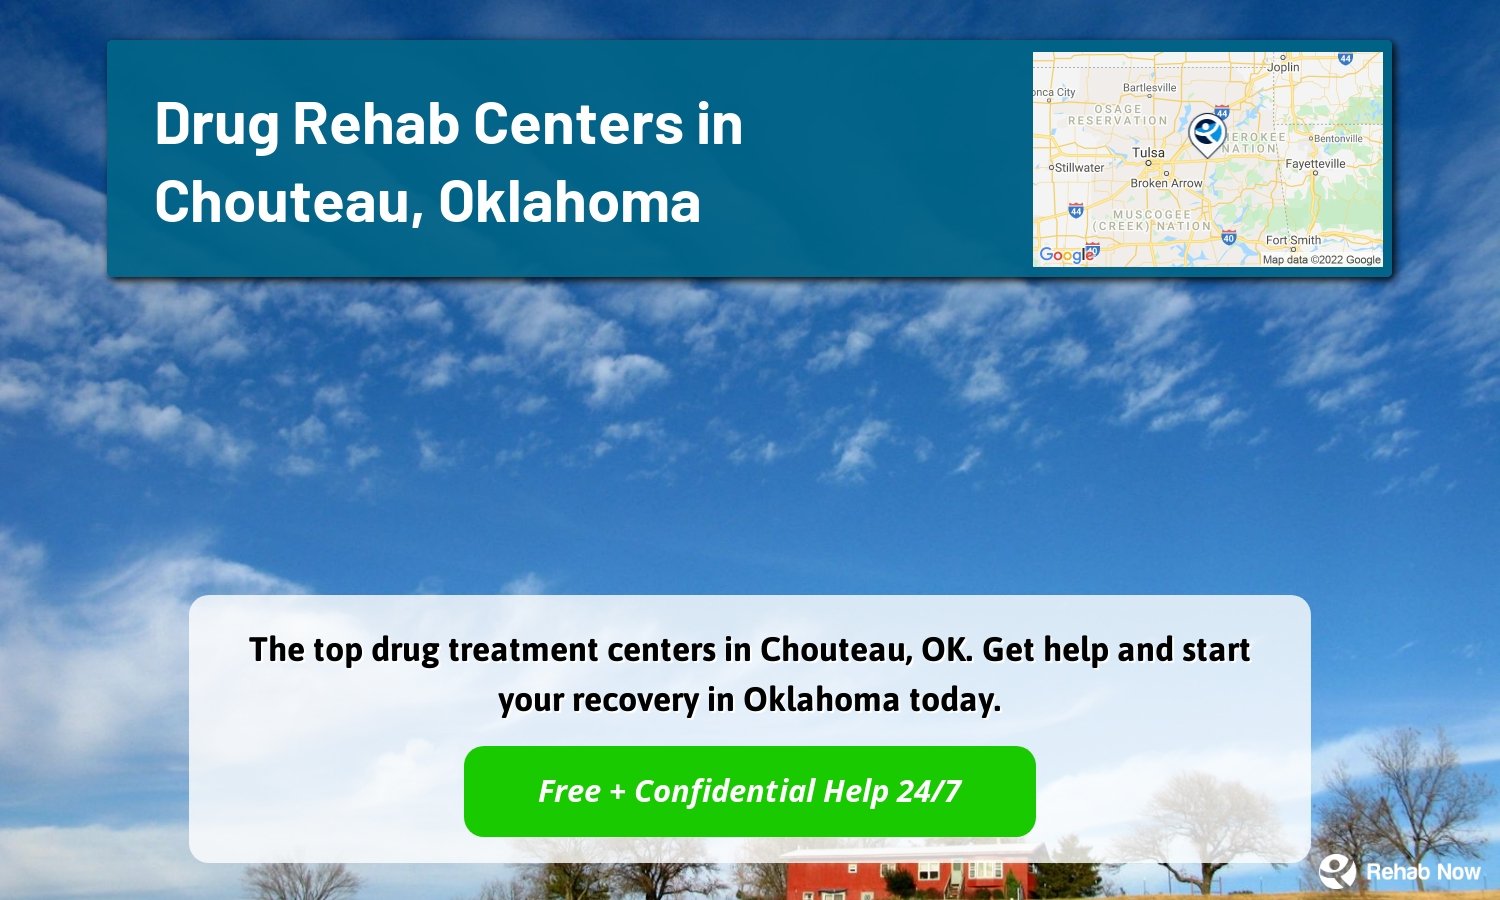 The top drug treatment centers in Chouteau, OK. Get help and start your recovery in Oklahoma today.